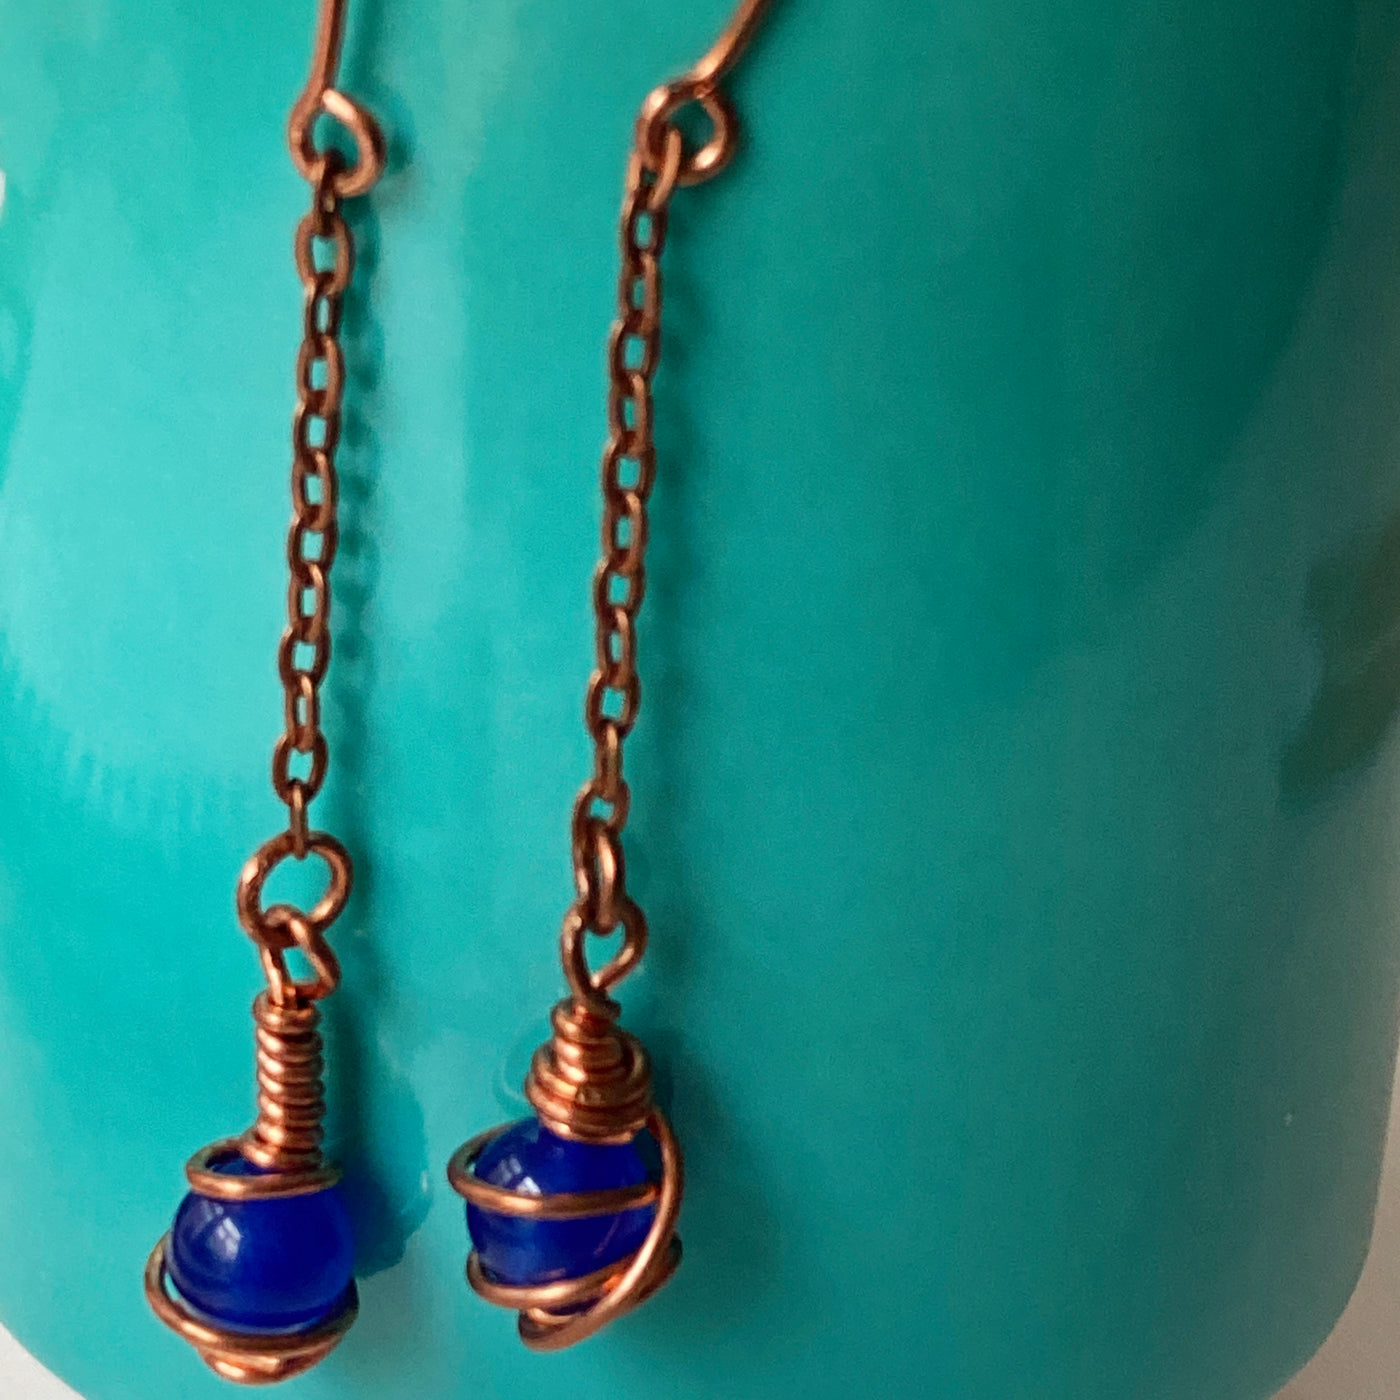 Blue calcedony agate on chain for Shake and move collection.